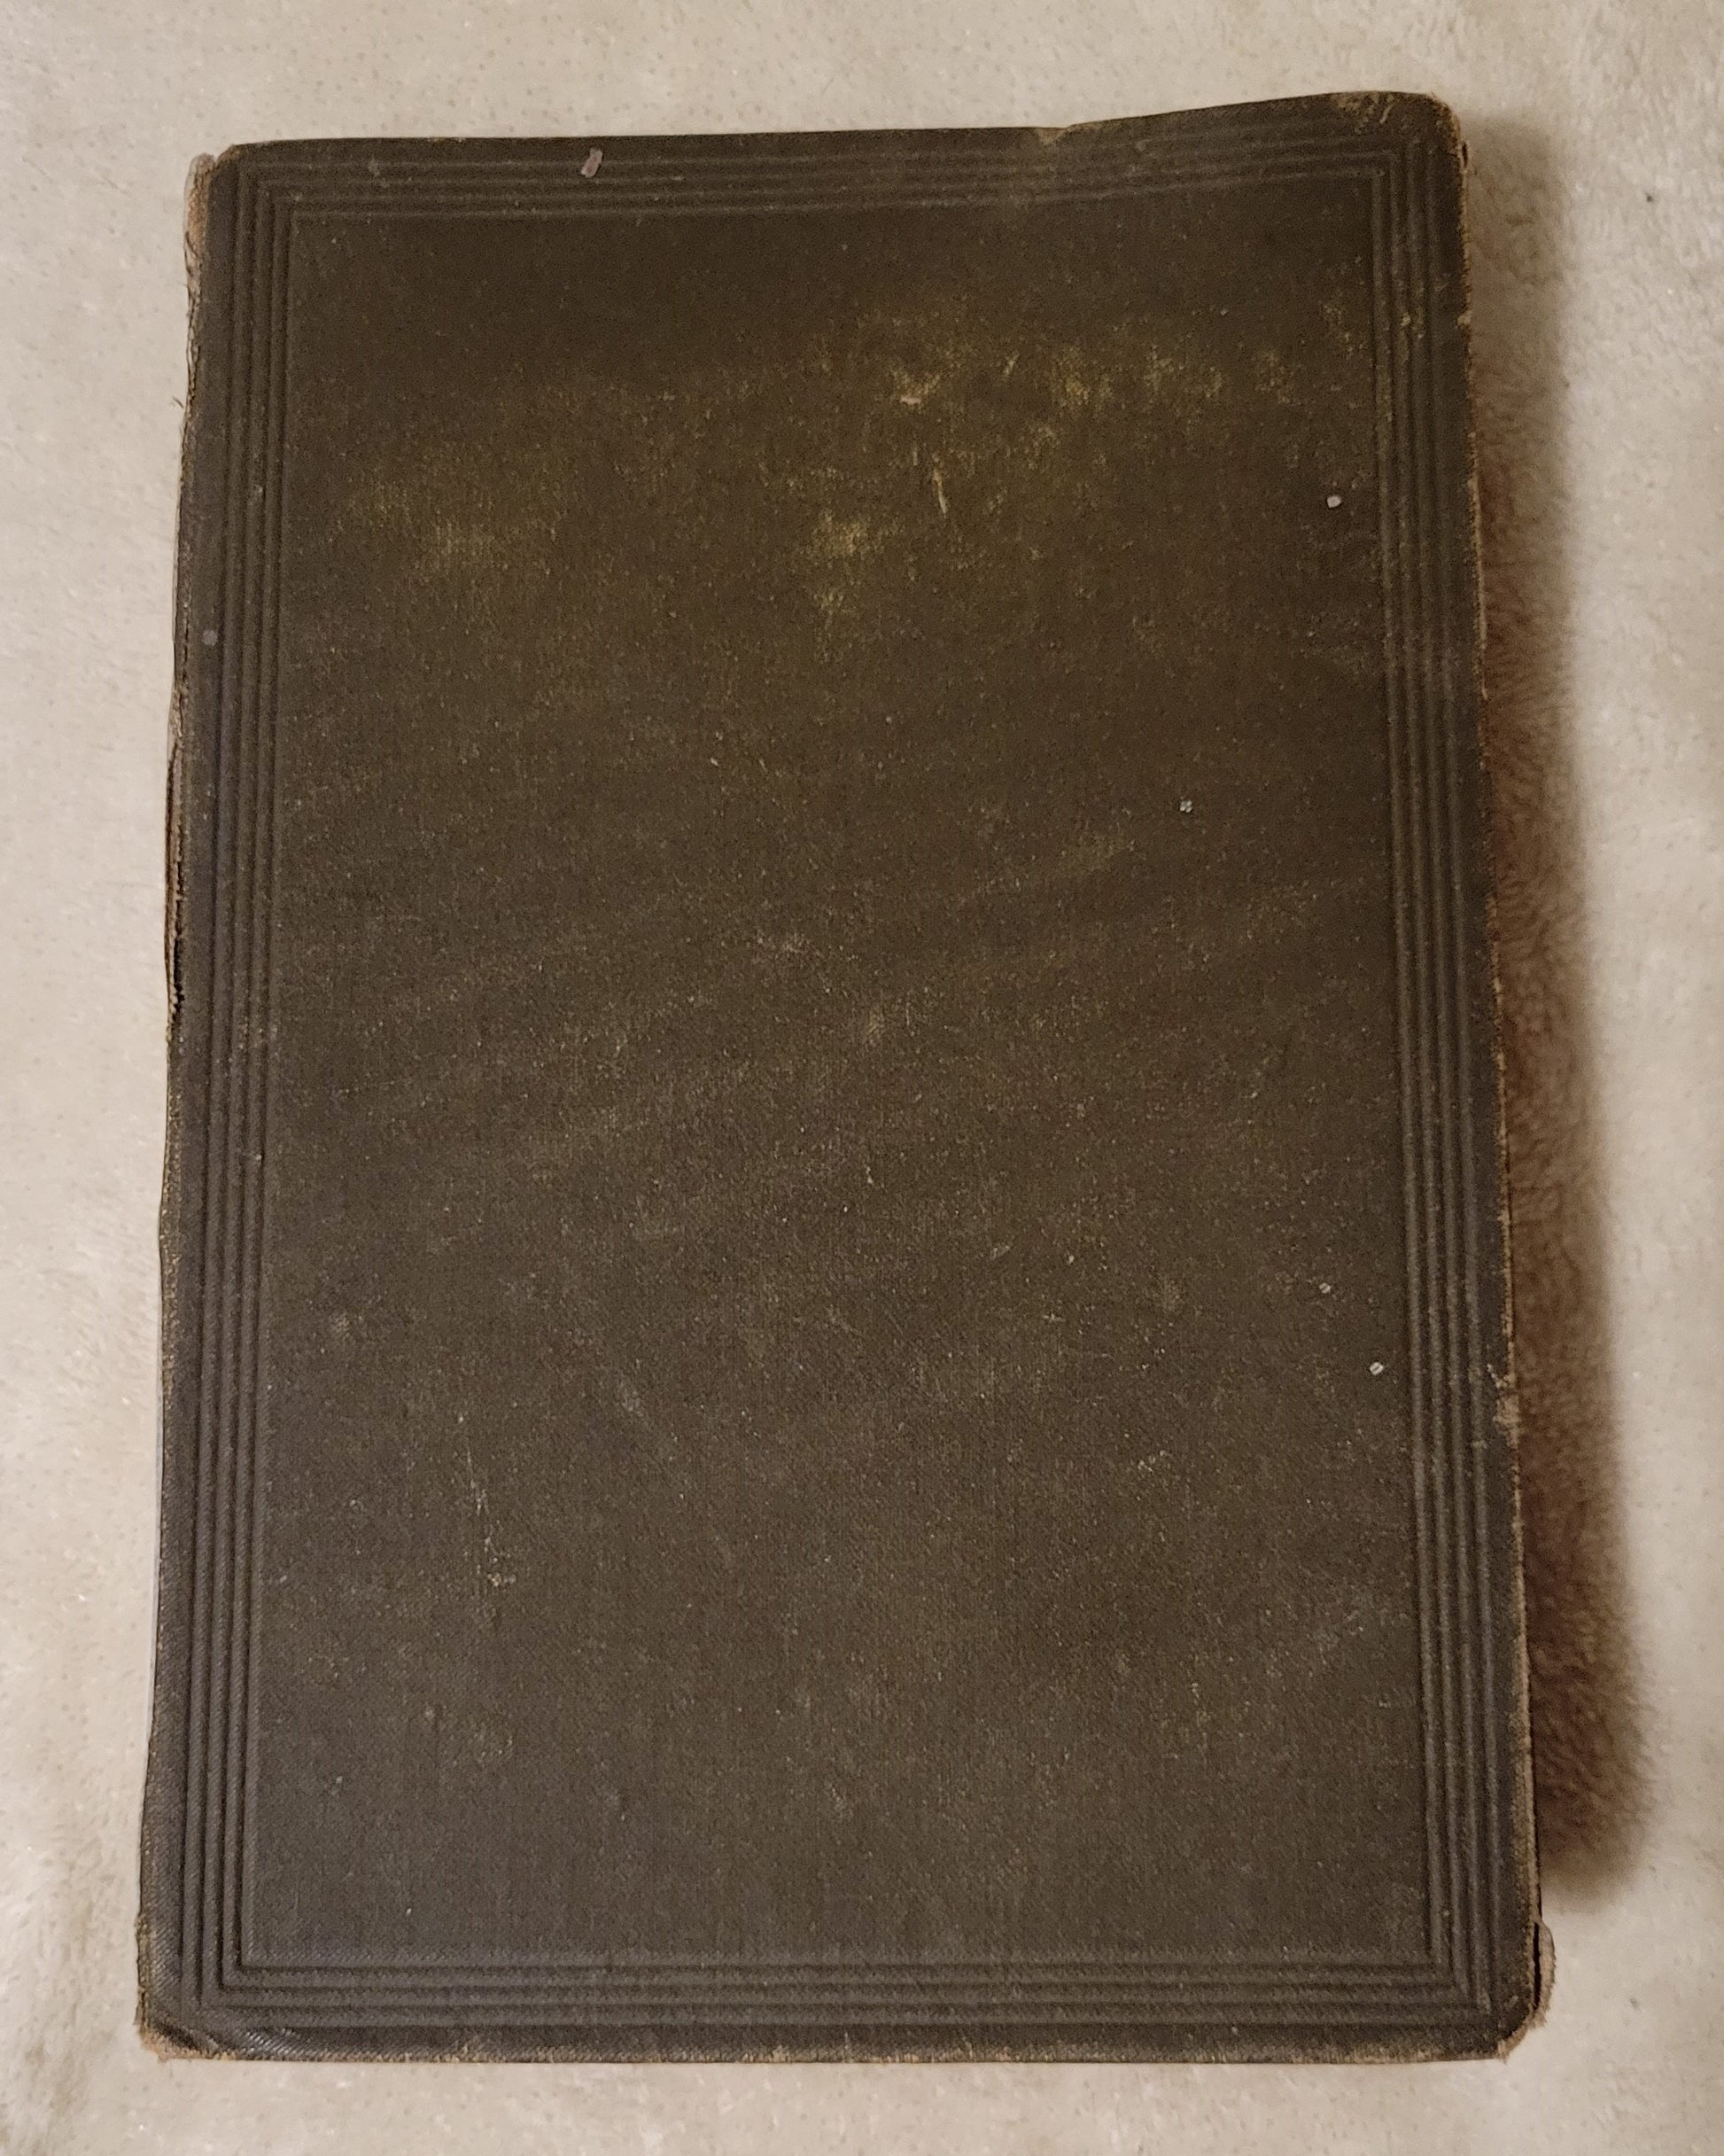 Antique book for sale, "The New Testament of the Our Lord and Saviour Jesus Christ", Oxford University Press, 1881. View of front cover.